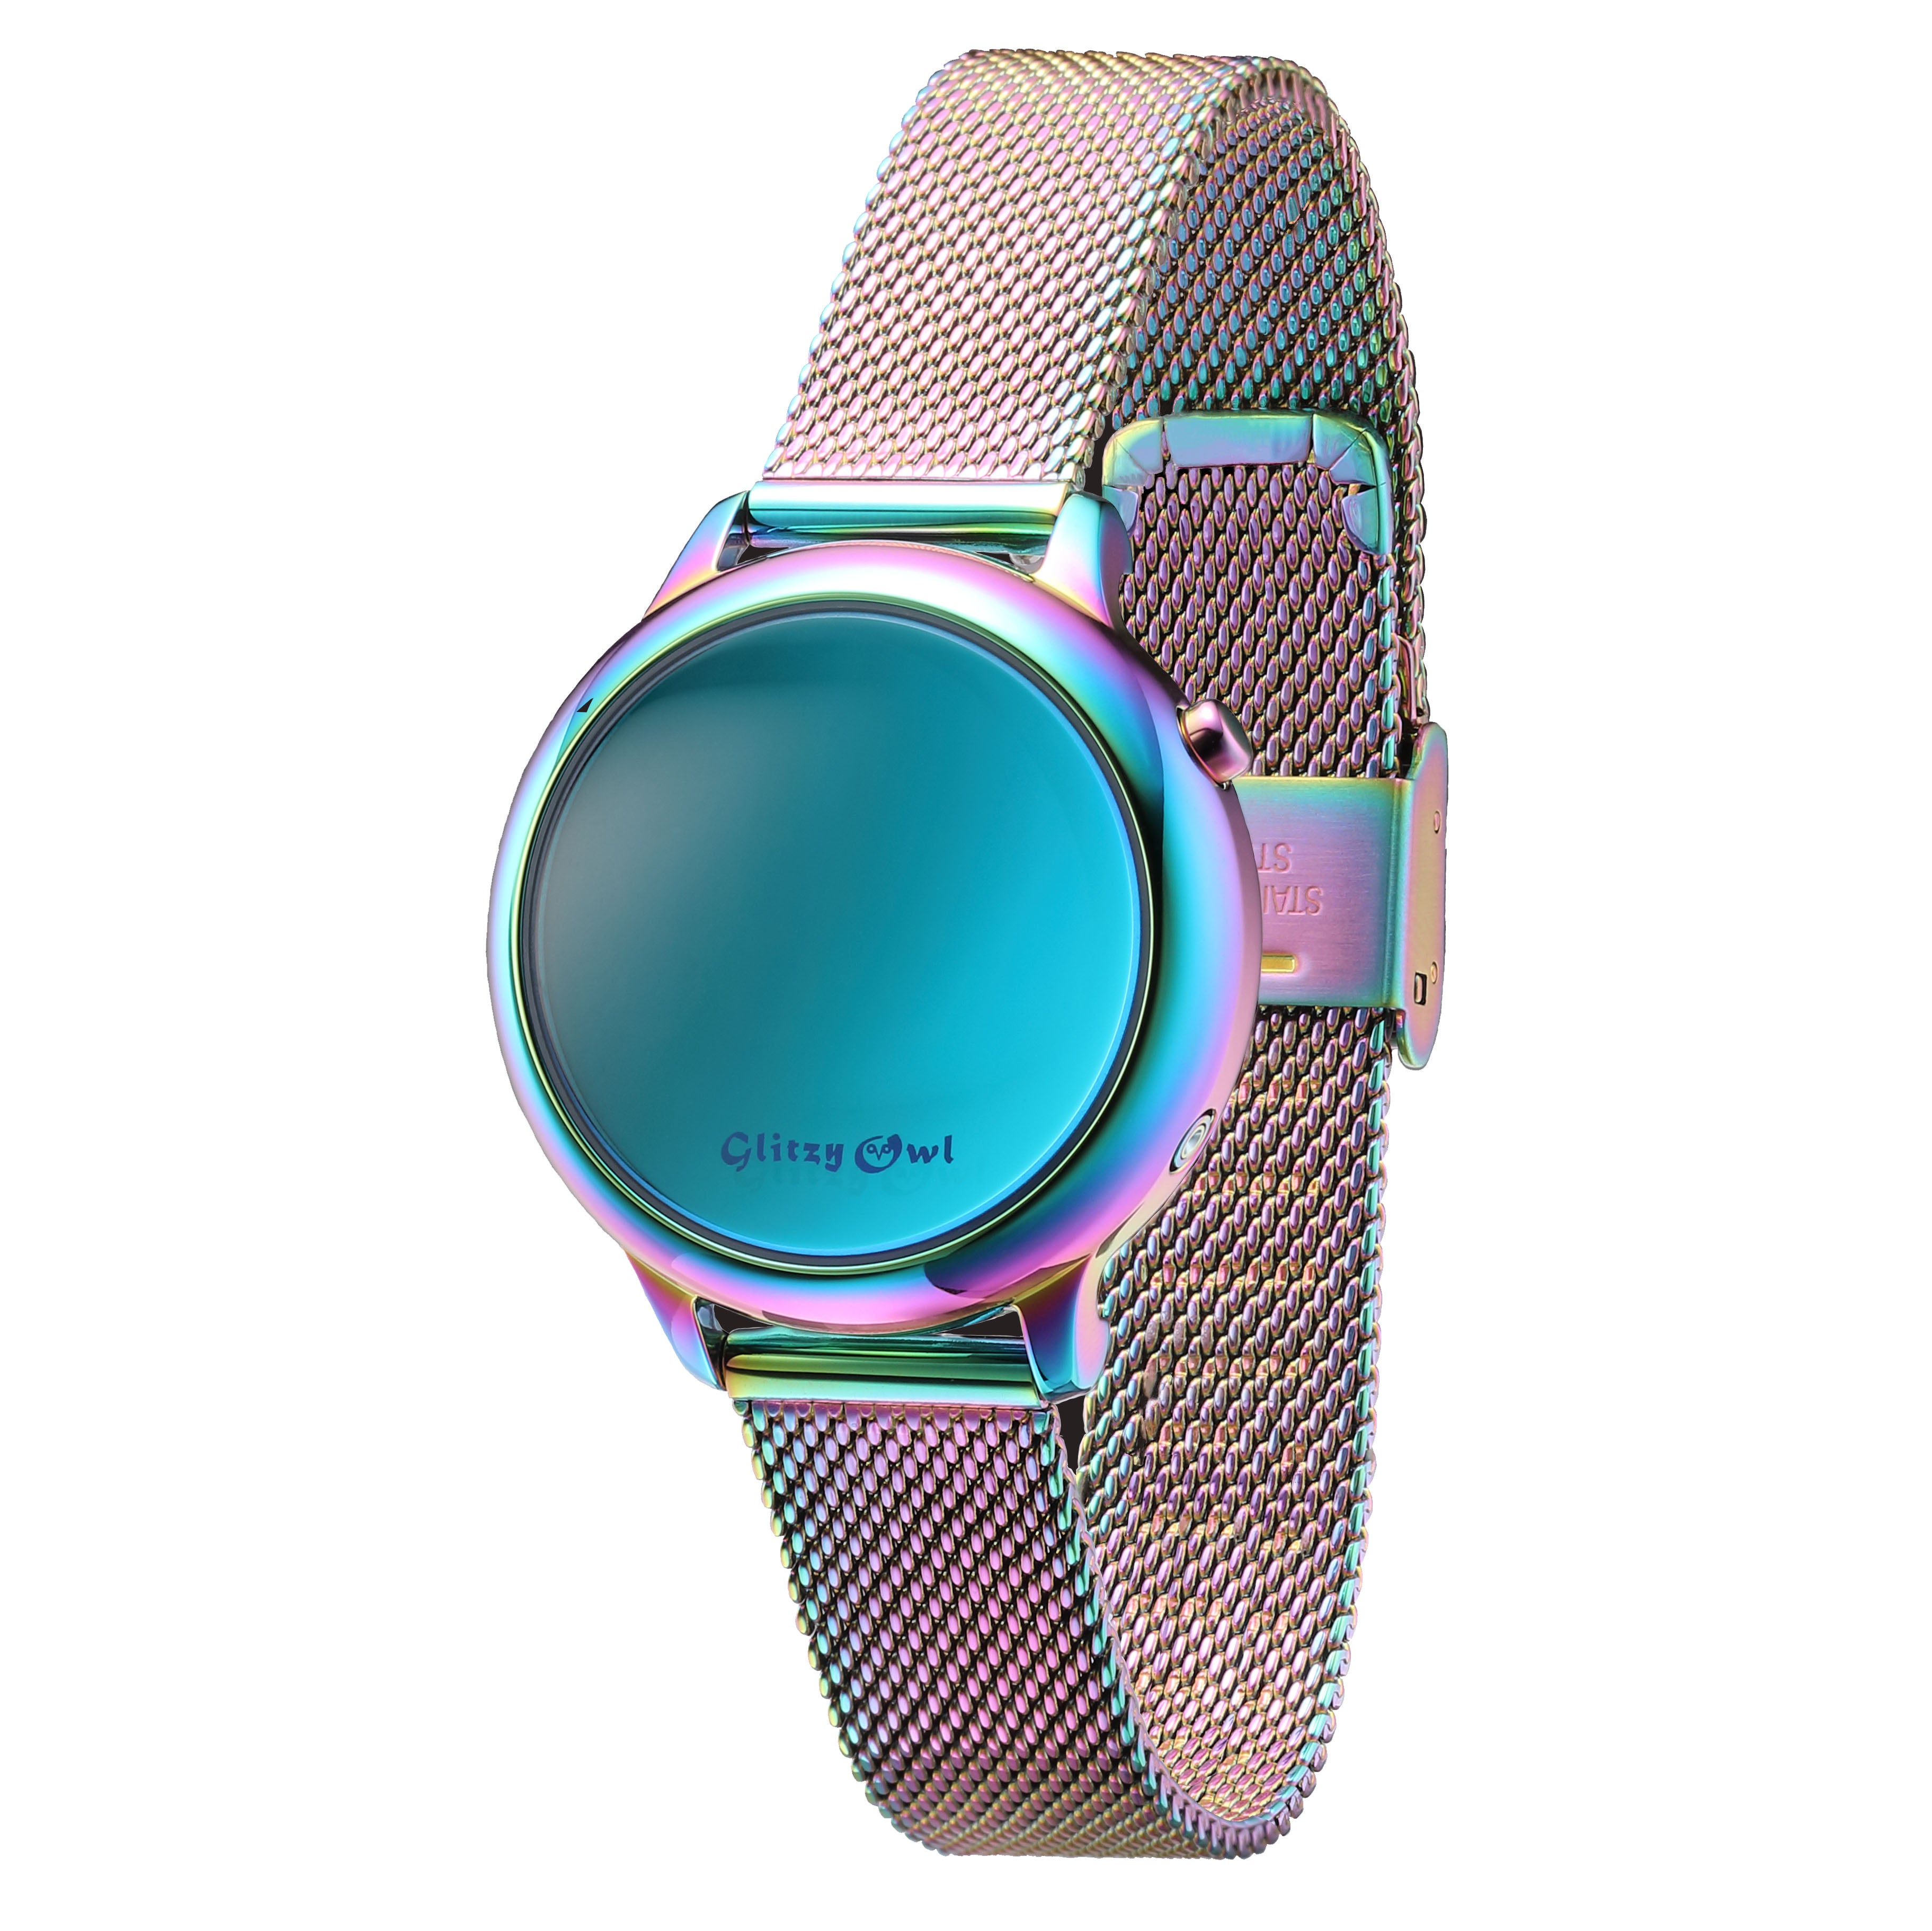 THE BUBBLE LED Iridescent Stainless Steel Watch